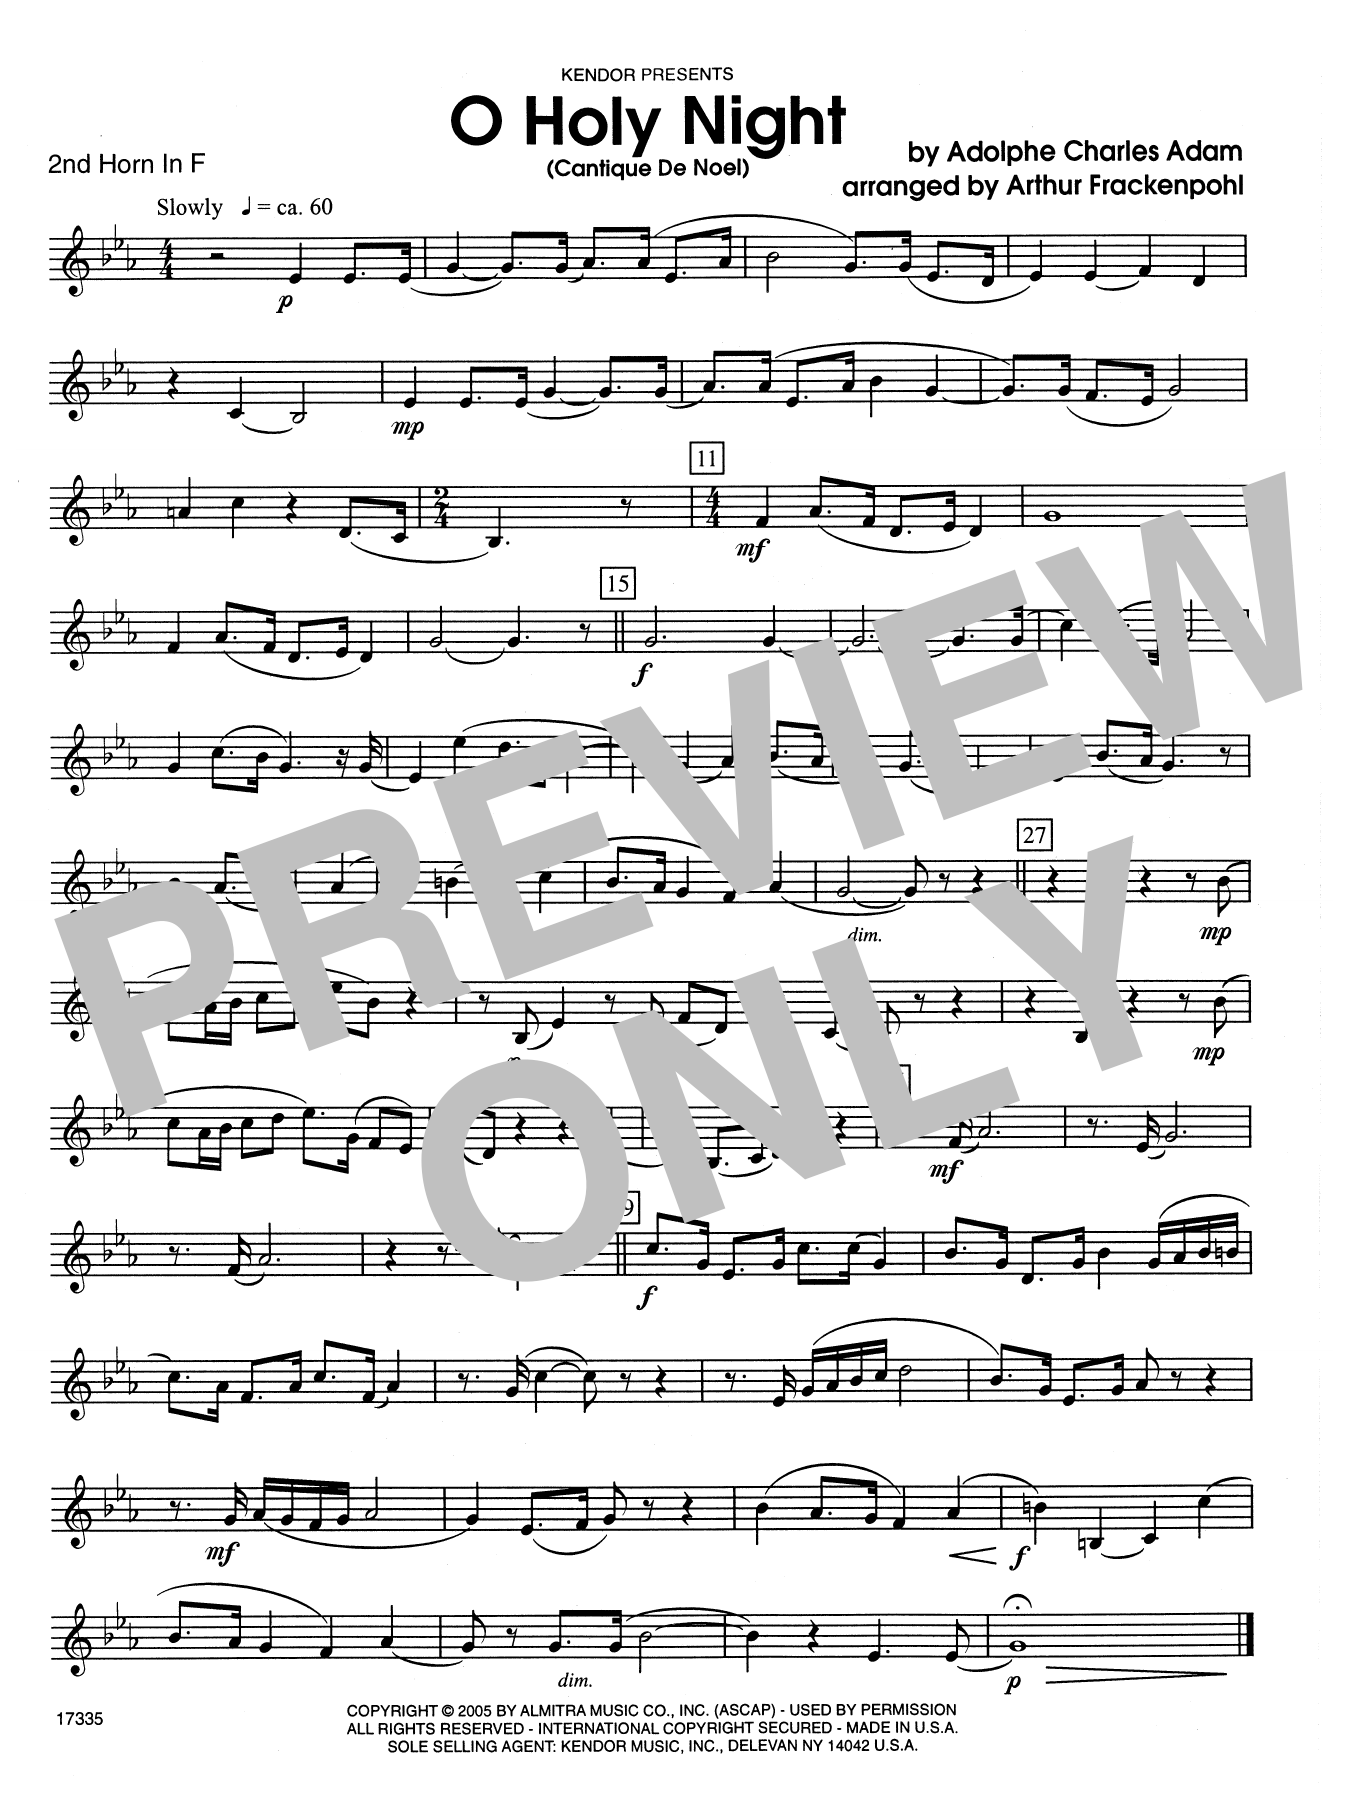 Arthur Frackenpohl O Holy Night (Cantique de Noel) - 2nd Horn in F sheet music notes and chords. Download Printable PDF.